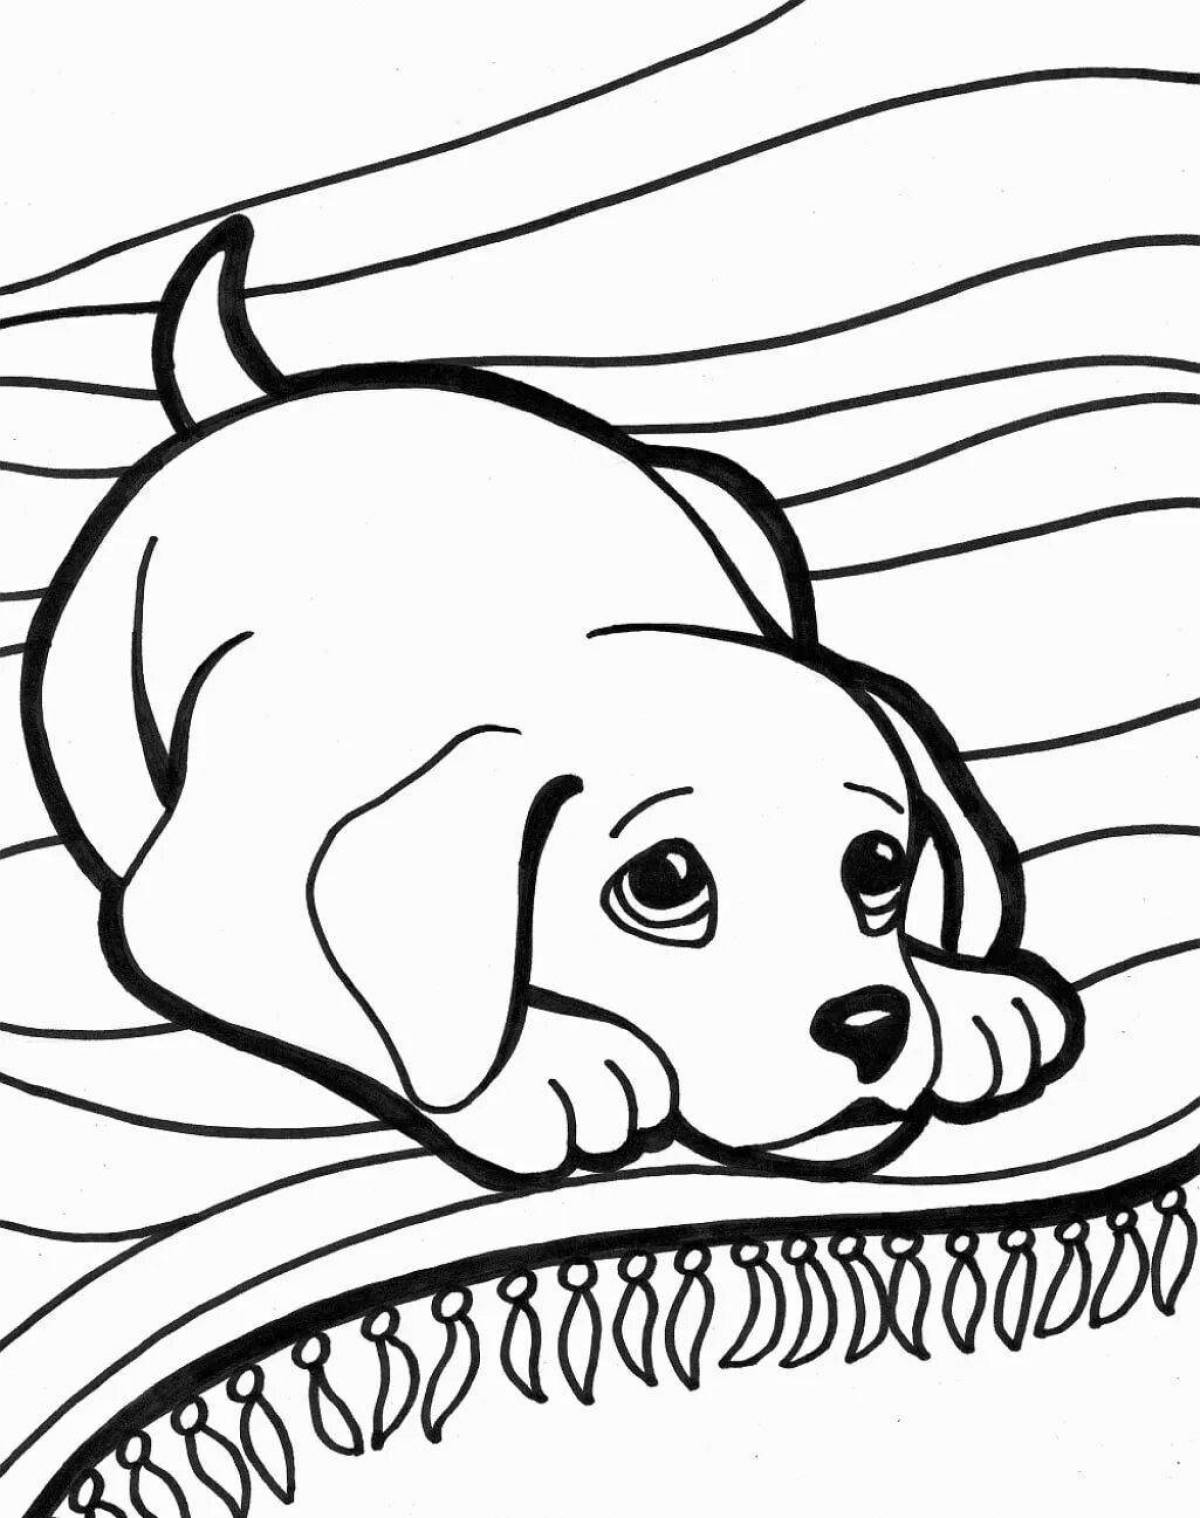 Radiant coloring page drawing of a dog